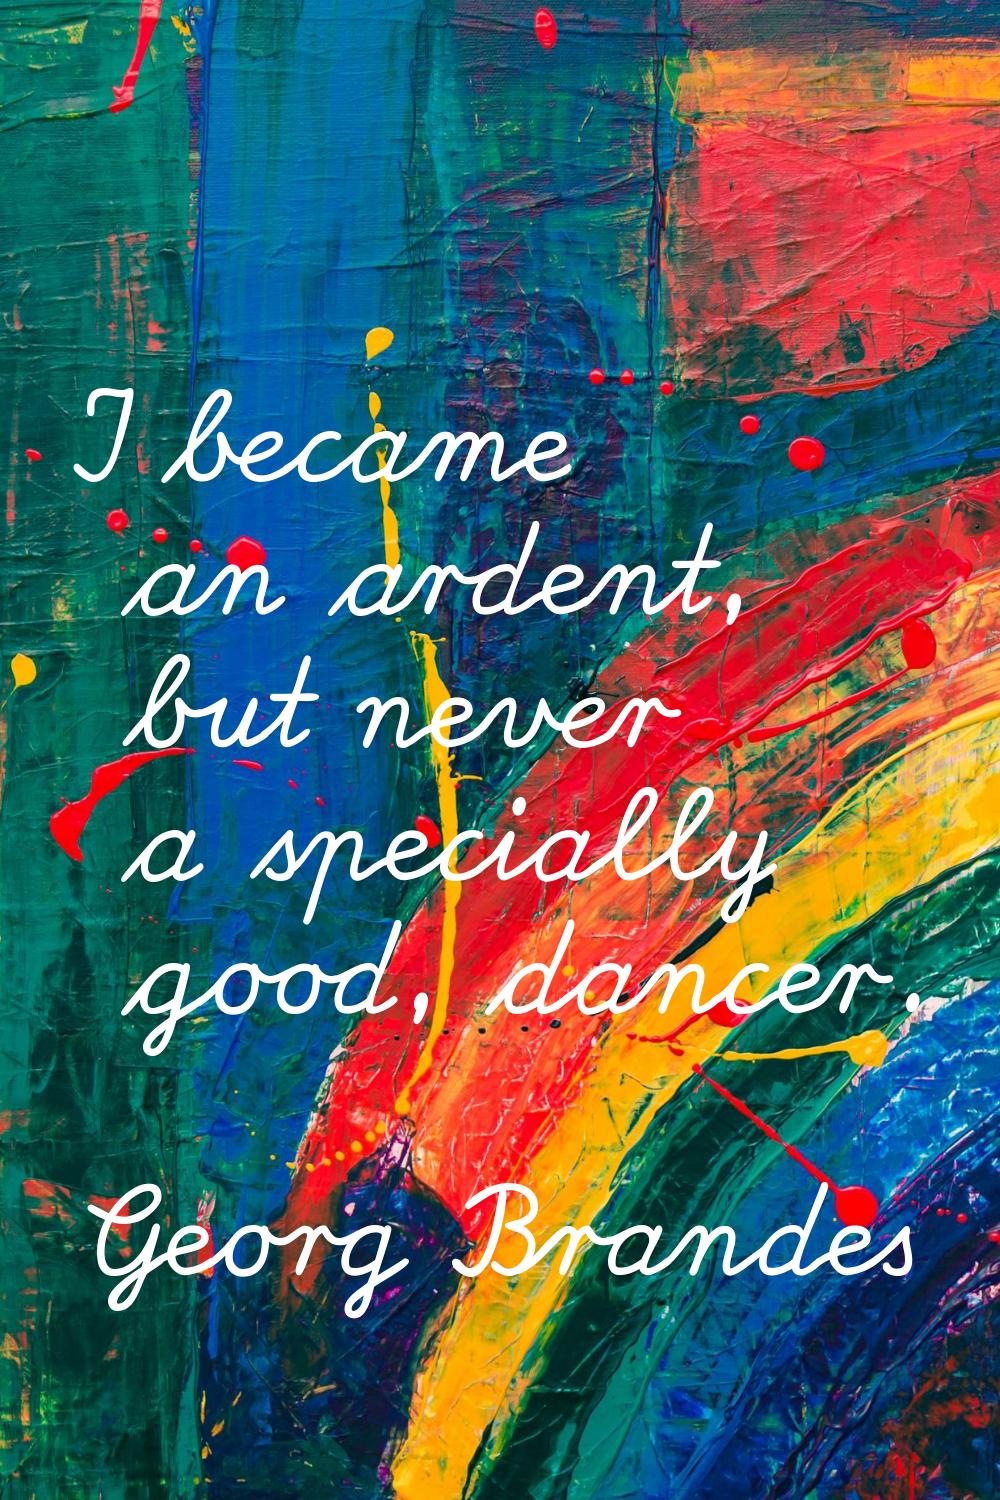 I became an ardent, but never a specially good, dancer.